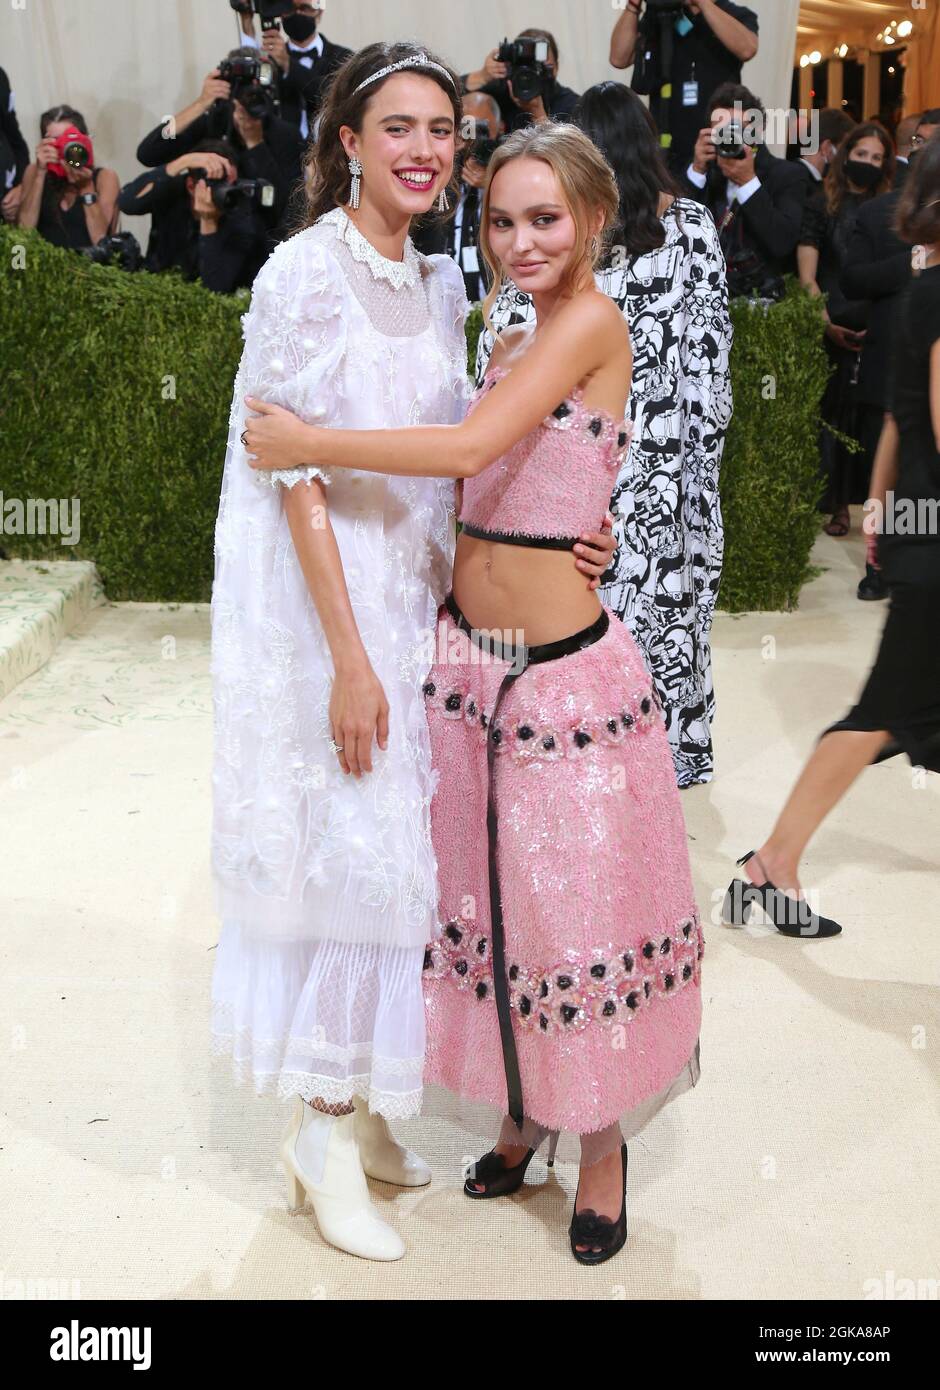 Why Actresses Lily-Rose Depp and Margaret Qualley Love the Chanel